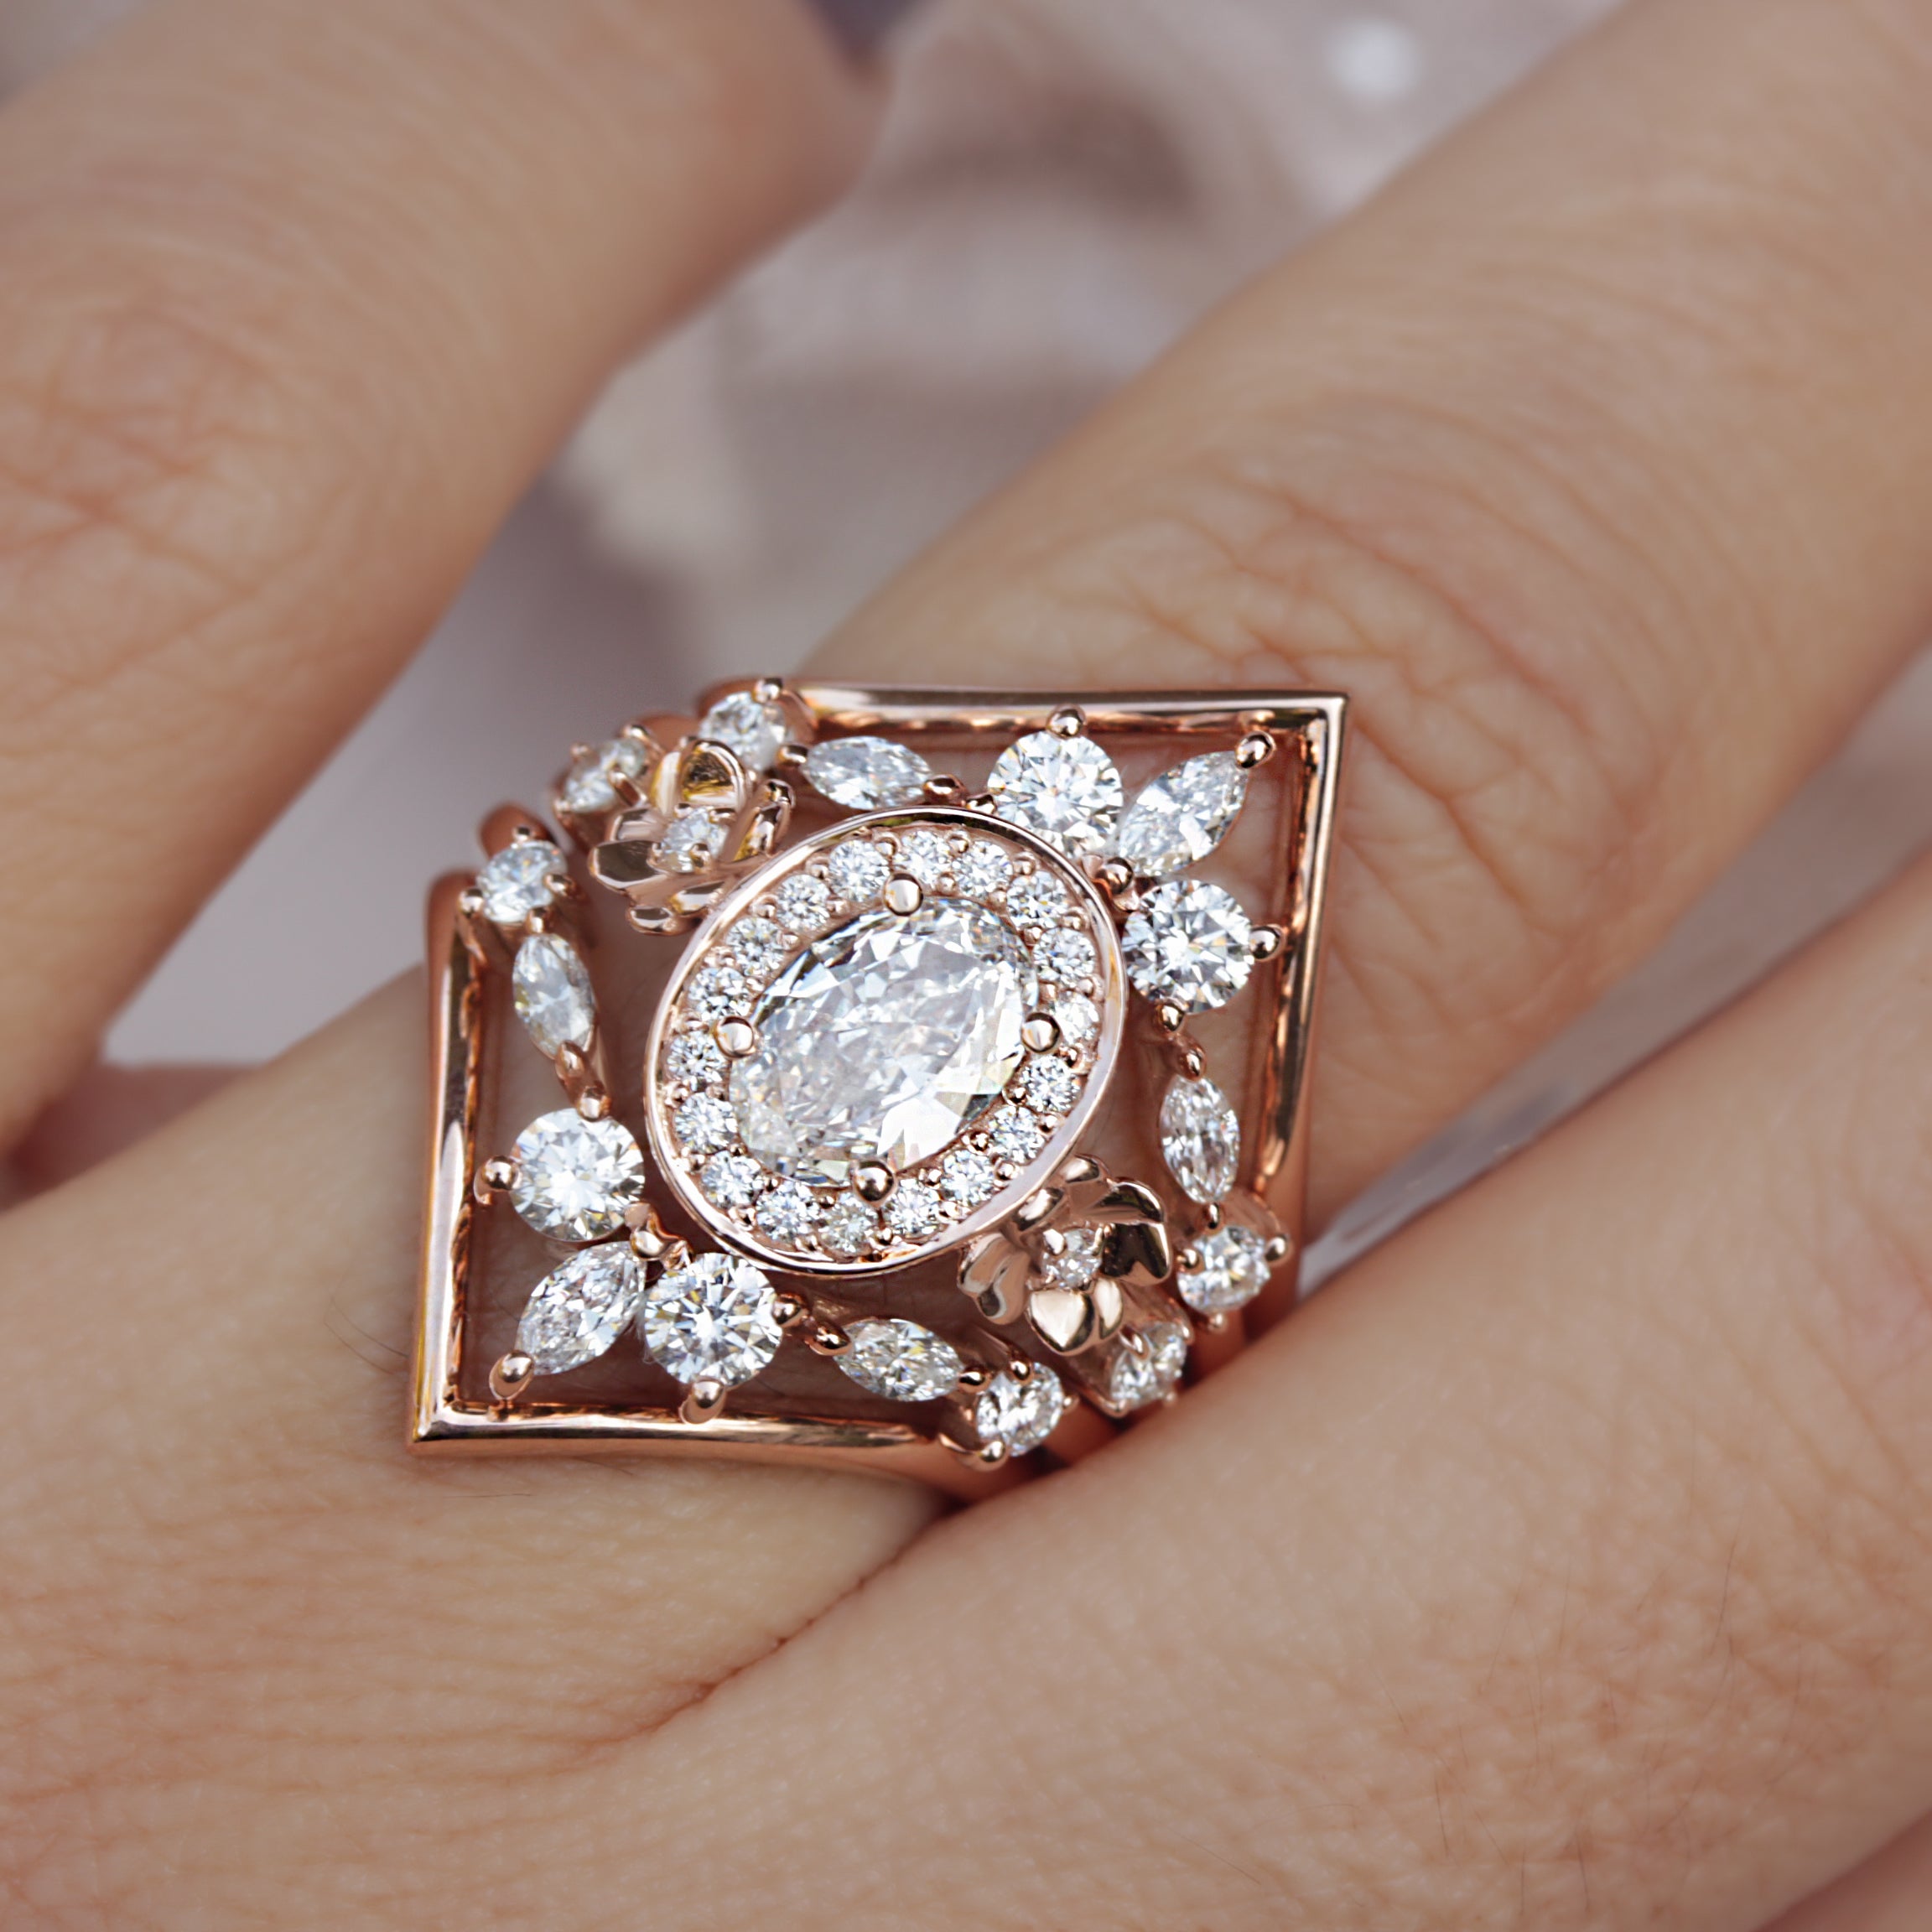 Oval Diamond Floral Ring "Antheia" & Her Sidebands Five Rings Set ♥